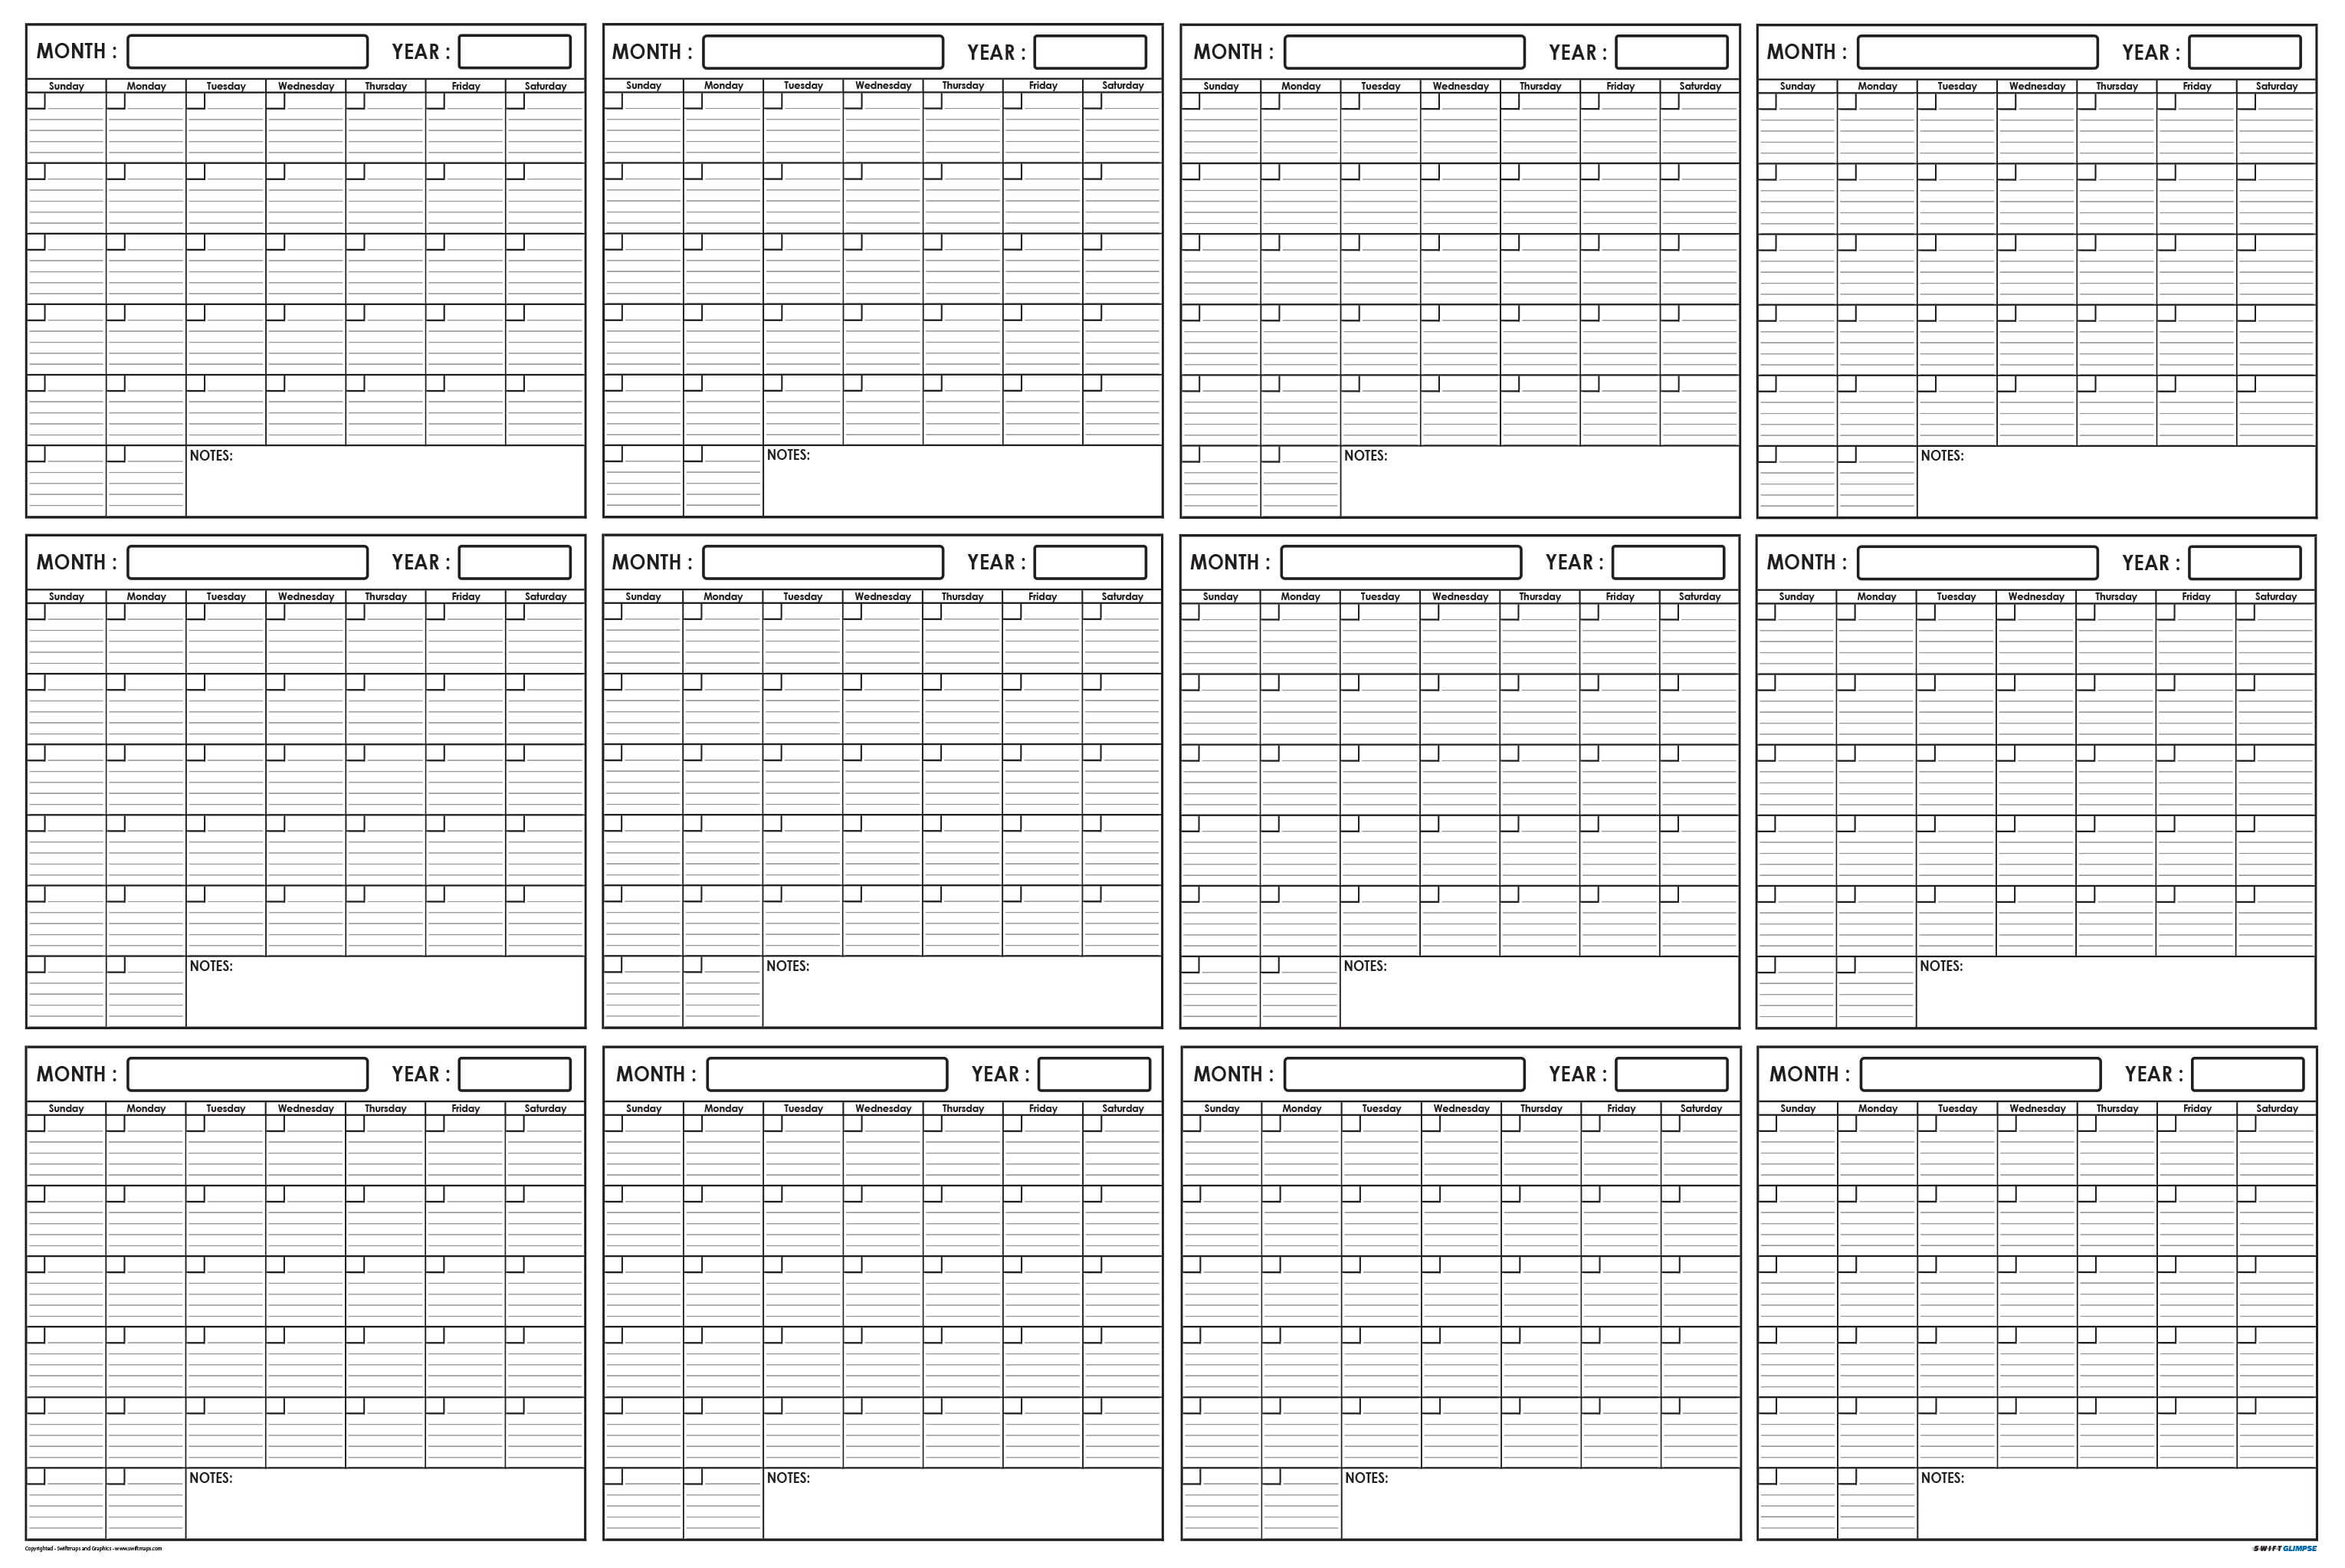 17.5 x 34 Whiteboard Calendar Poster Purple Blank Month Calendar for Wall Dry Erase Monthly Calendar with College & High School Schedule Tracker Wall Calendars for Students 